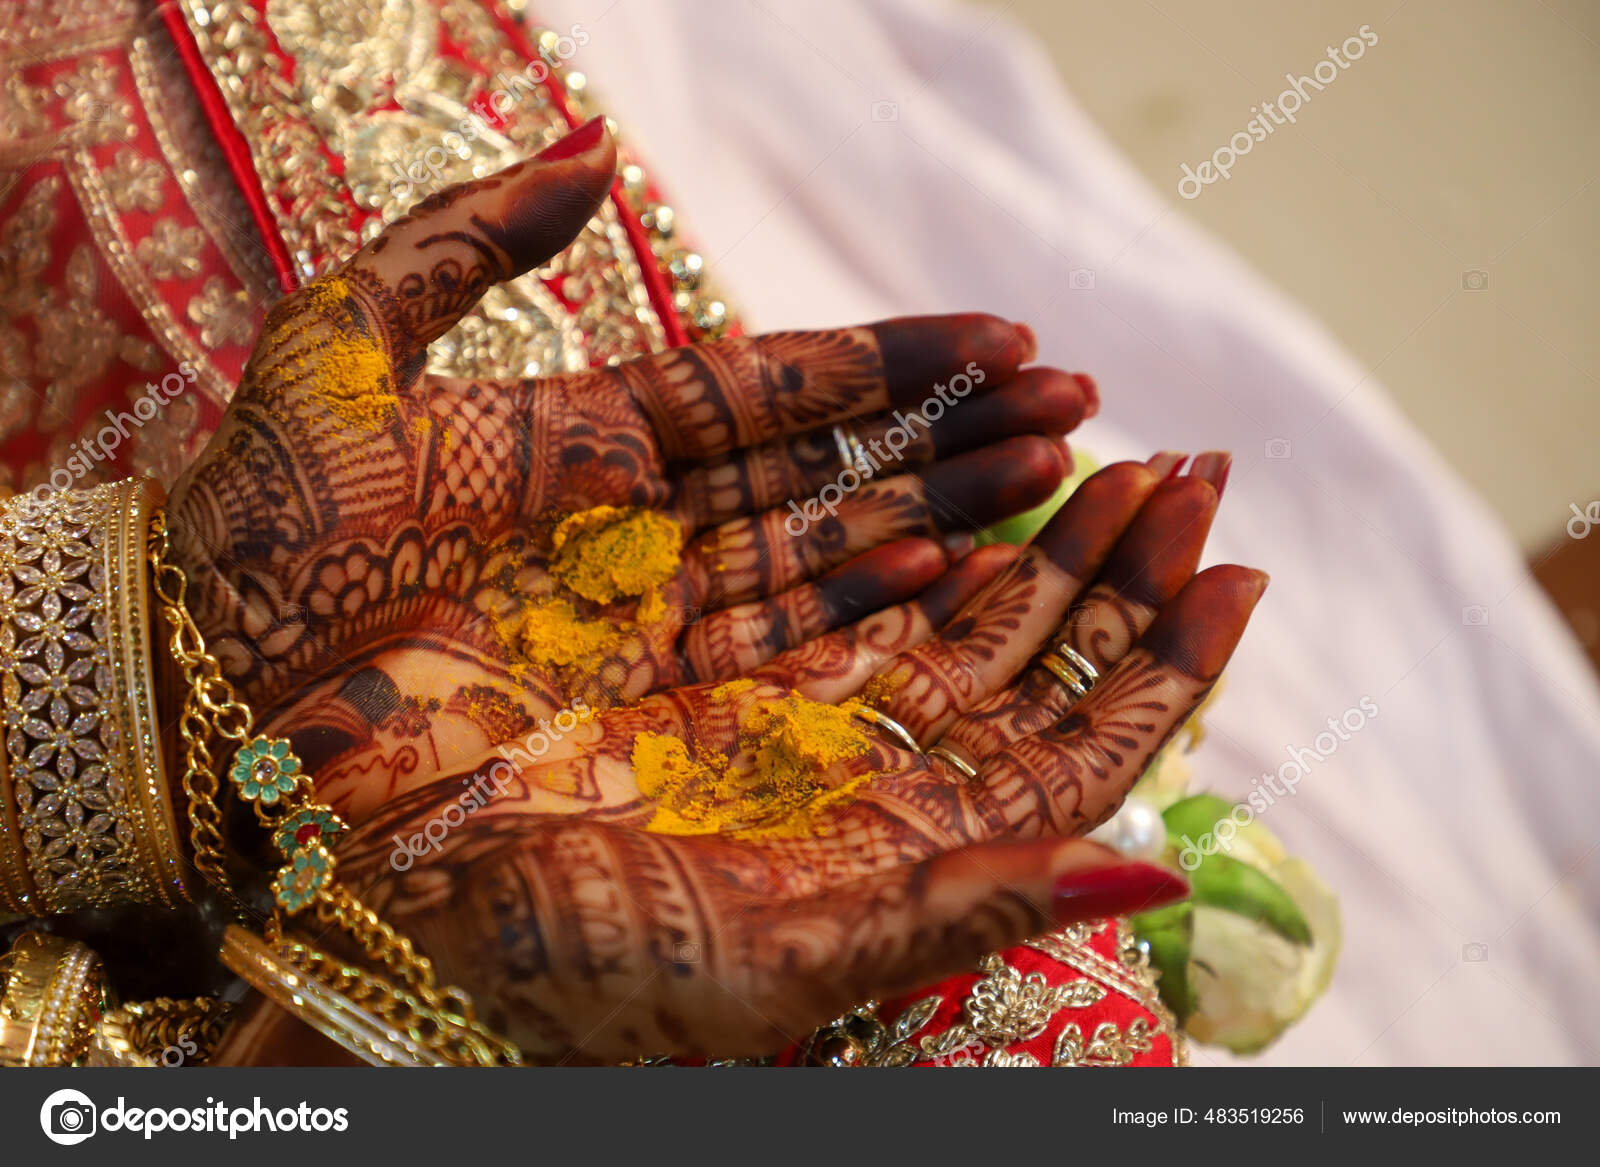 A close up of a person holding a ring photo – Indian art Image on Unsplash